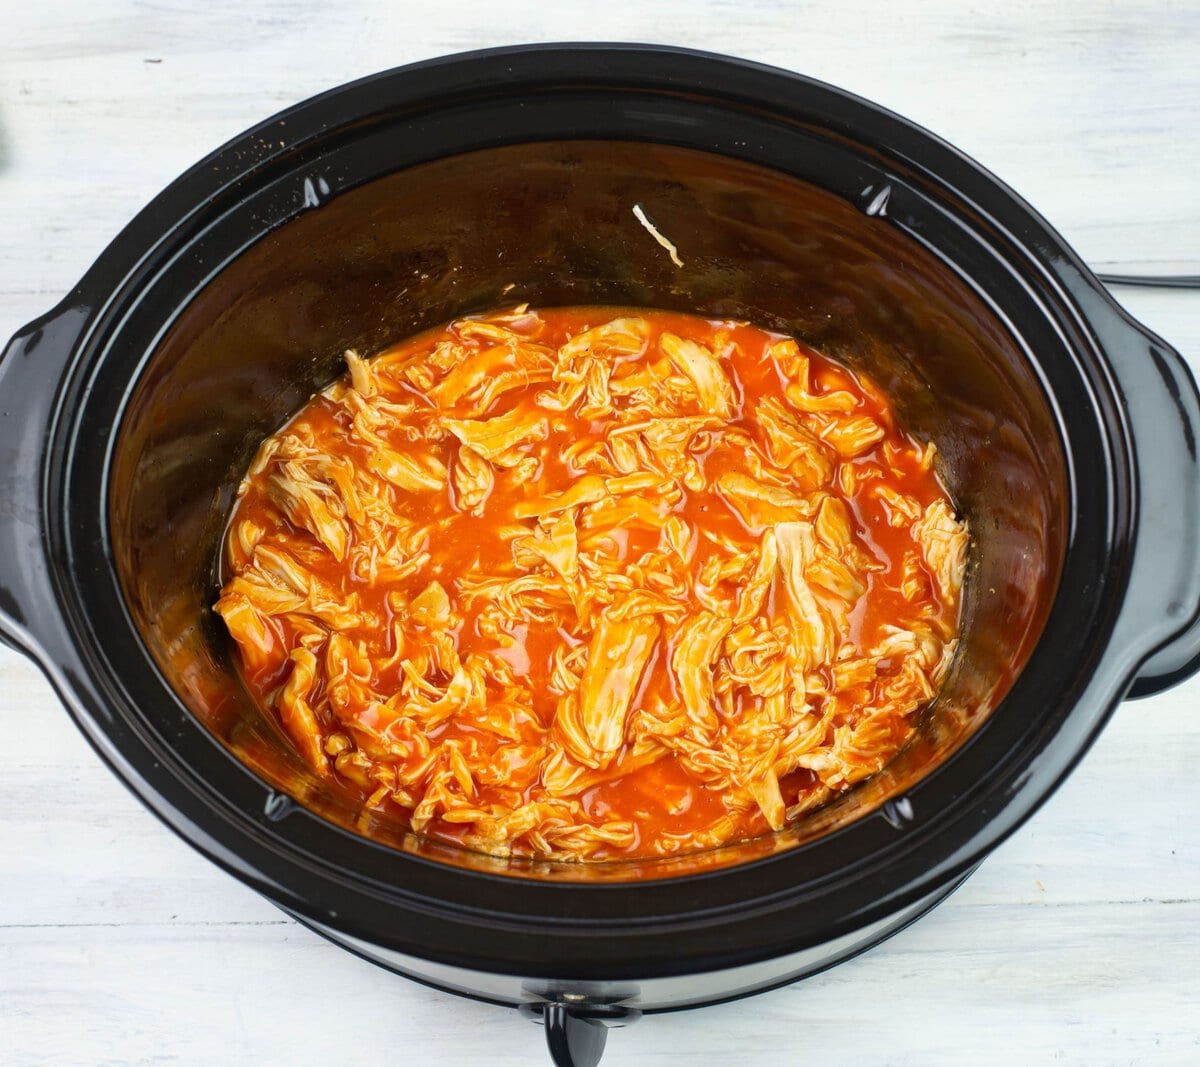 Cooking the crock pot pulled buffalo chicken until thickened.